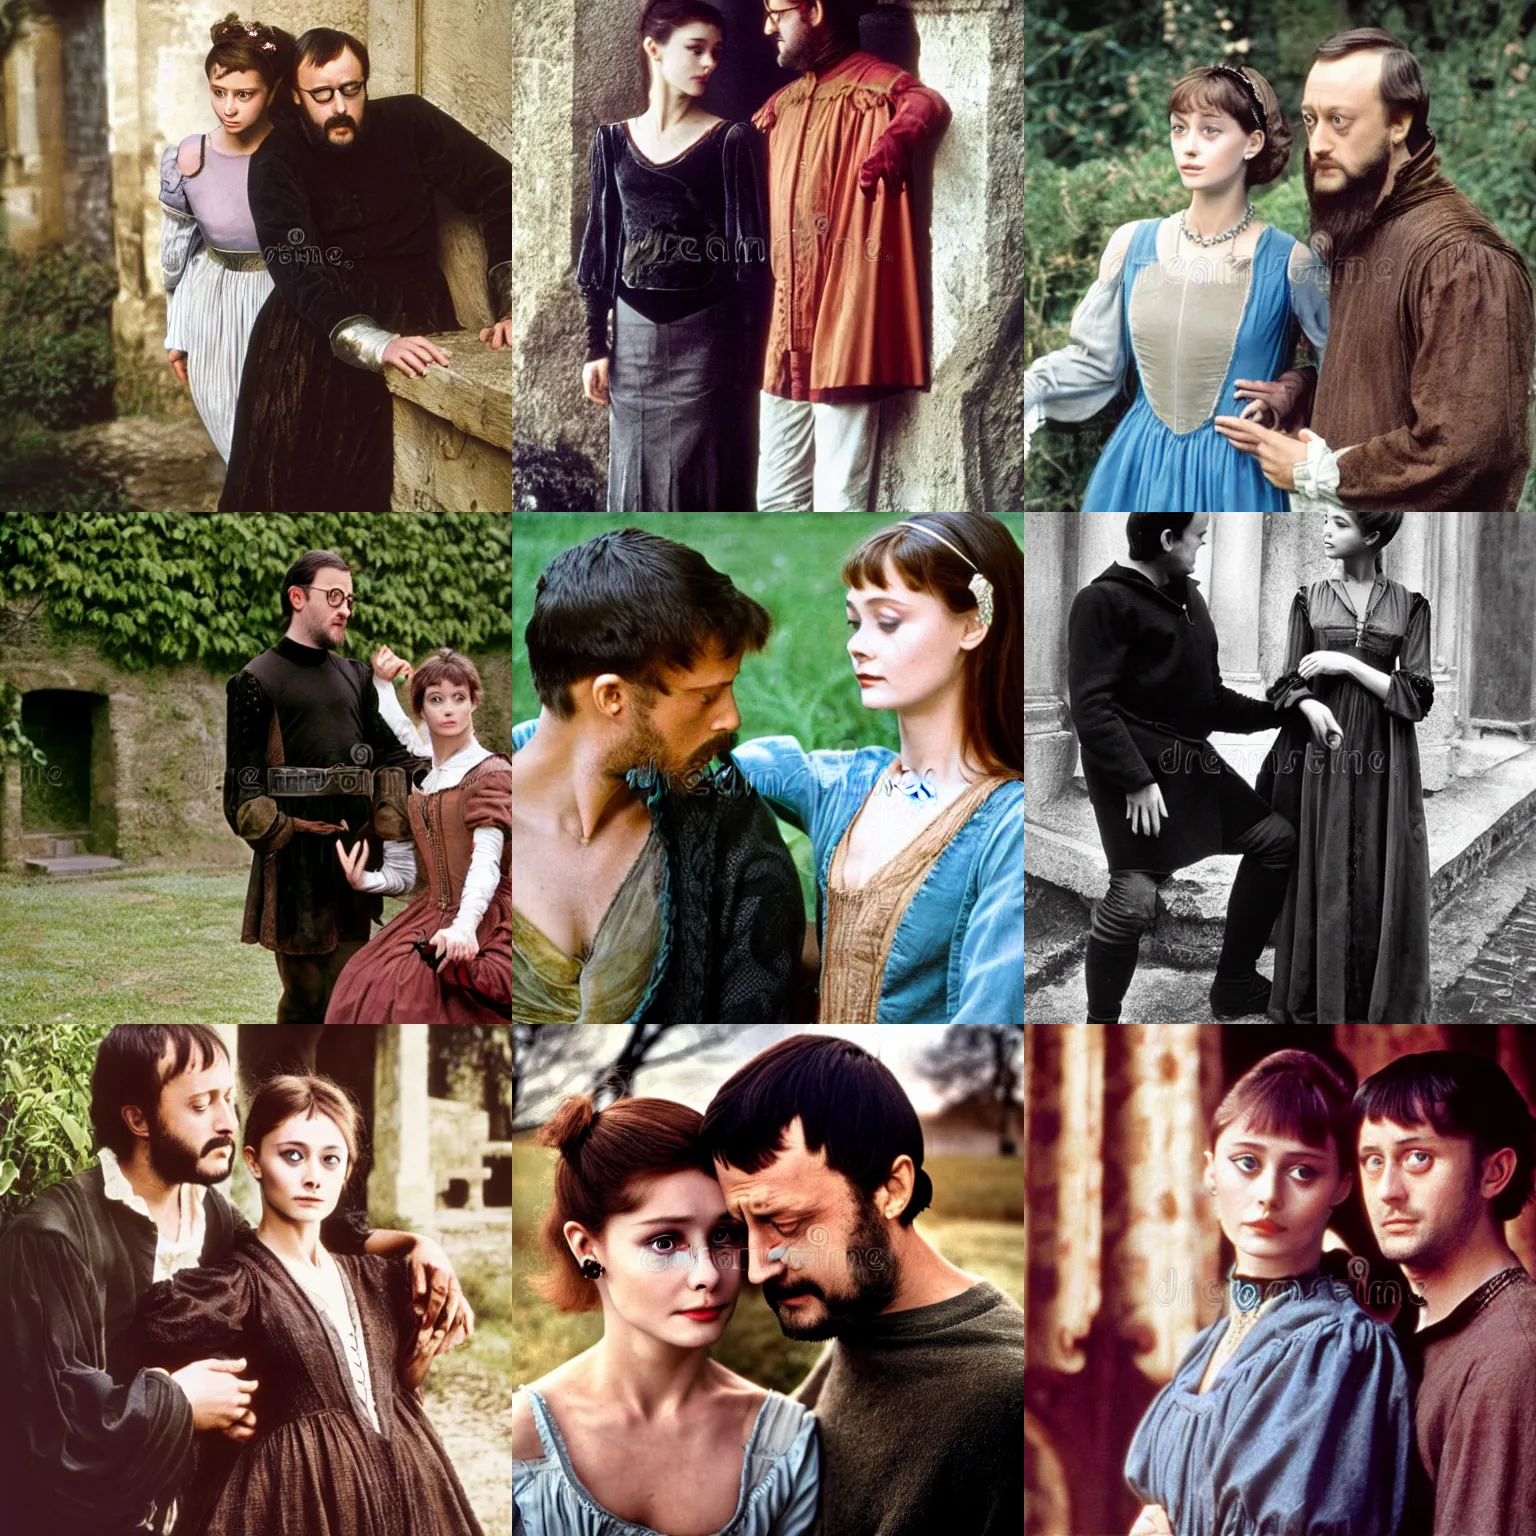 Prompt: hamlet ( young jean reno without subglasses ) and ophelia ( young audrey hepburn ) in the 1 6 th century denmark, drama play stock photo by steve mccurry